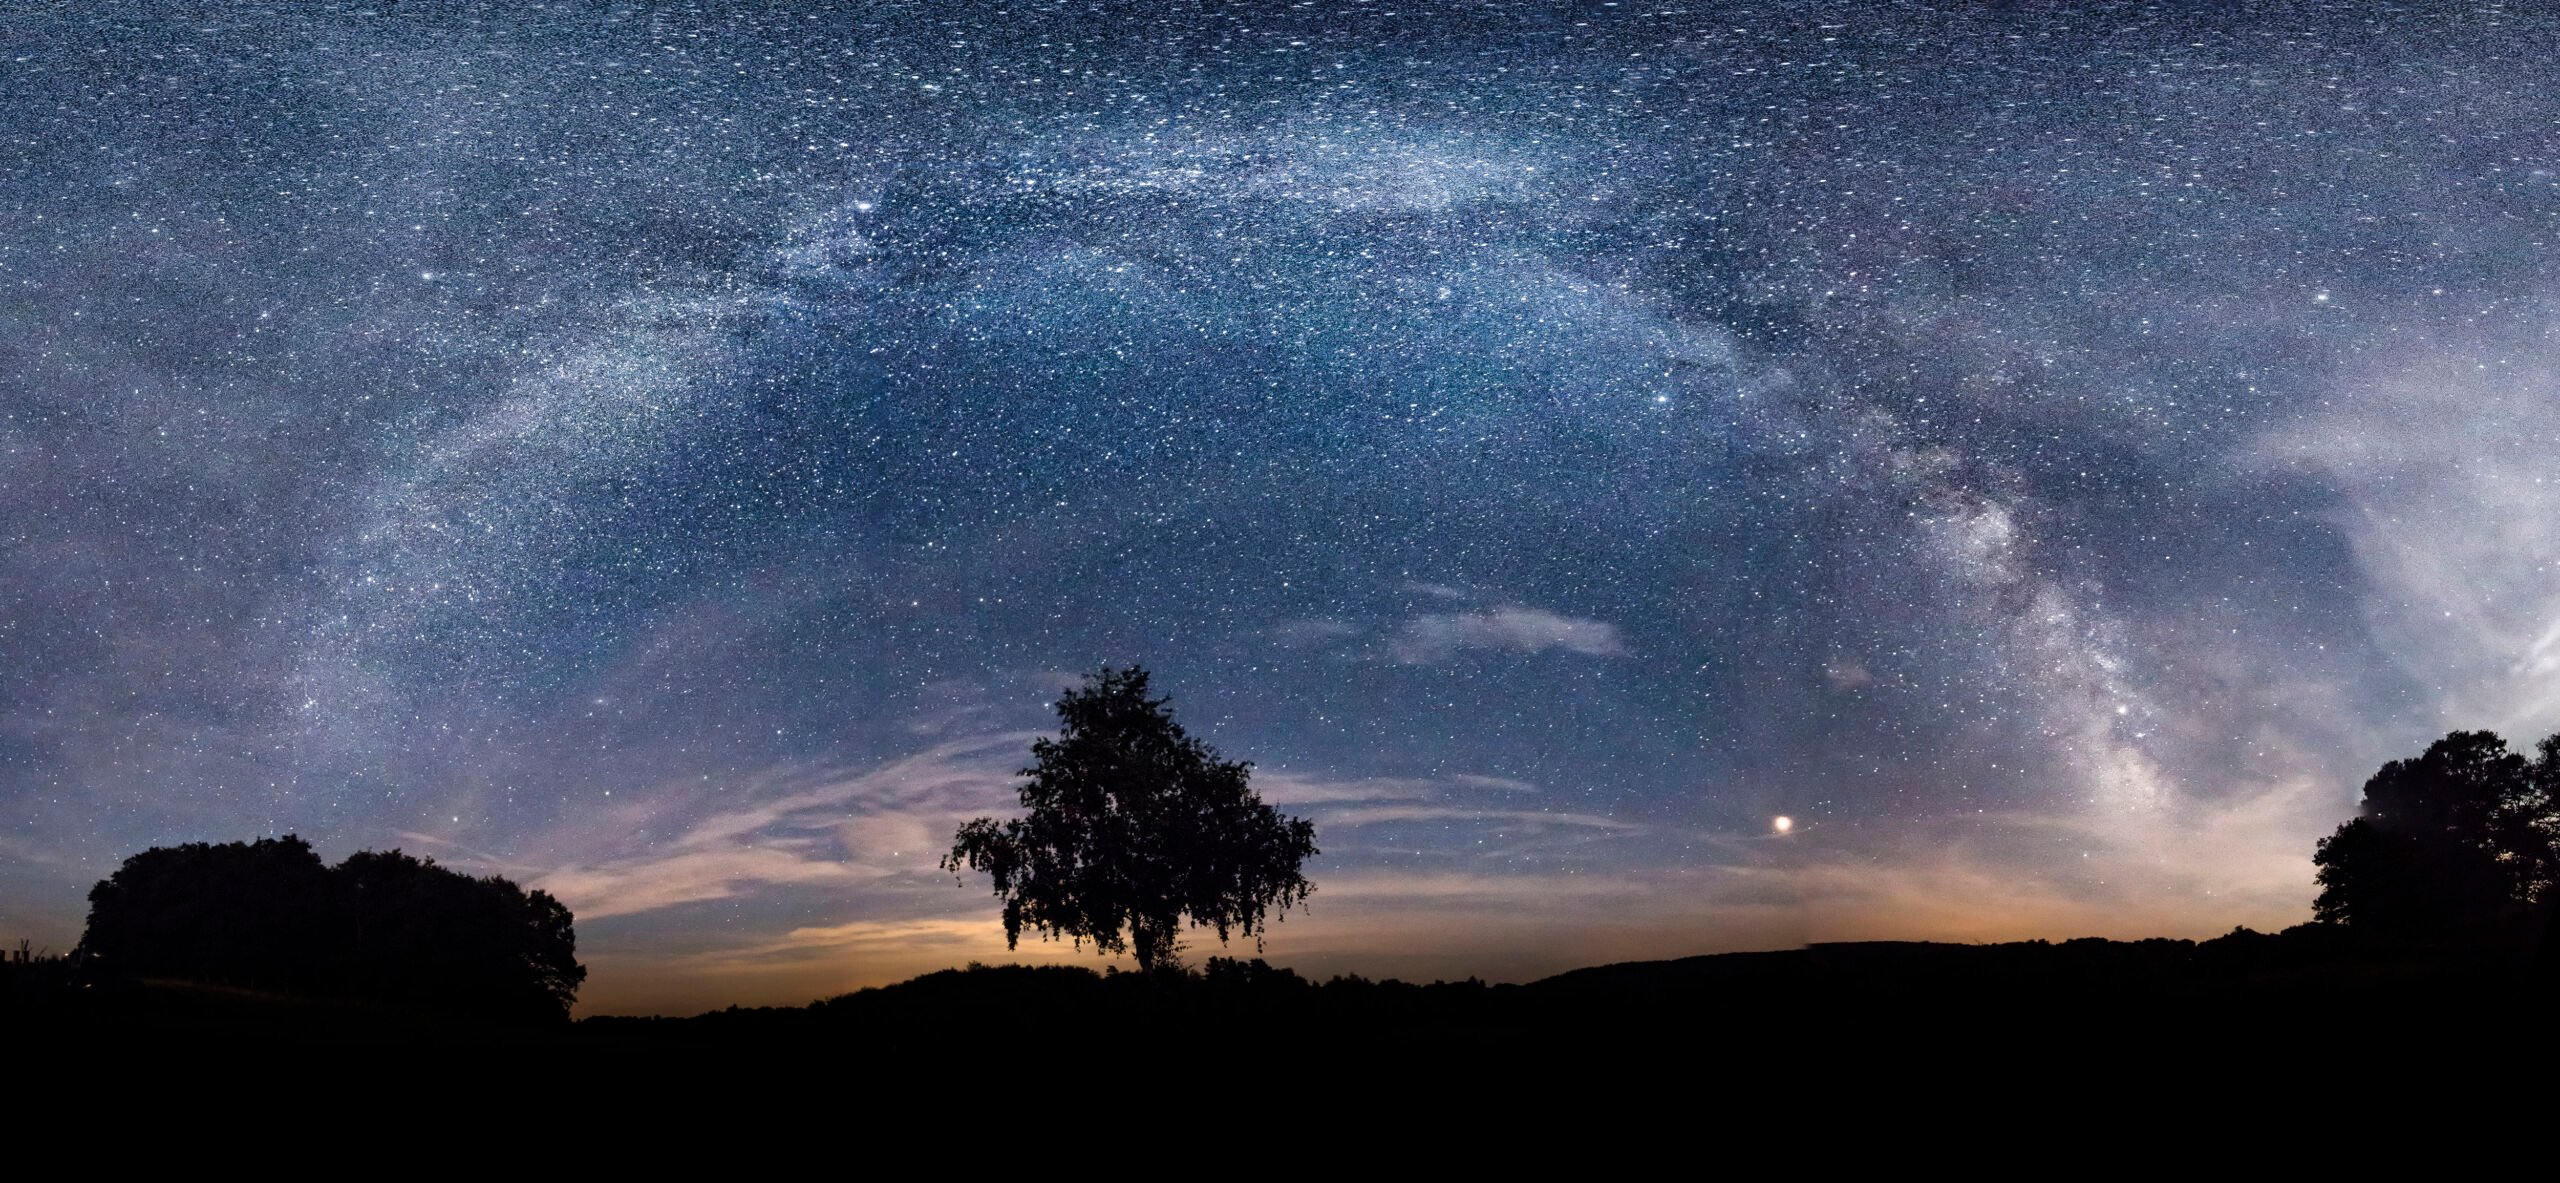 The Regional Natural Park of Millevaches in Limousin Saves Another Piece of Western Europe’s Nightscape Image